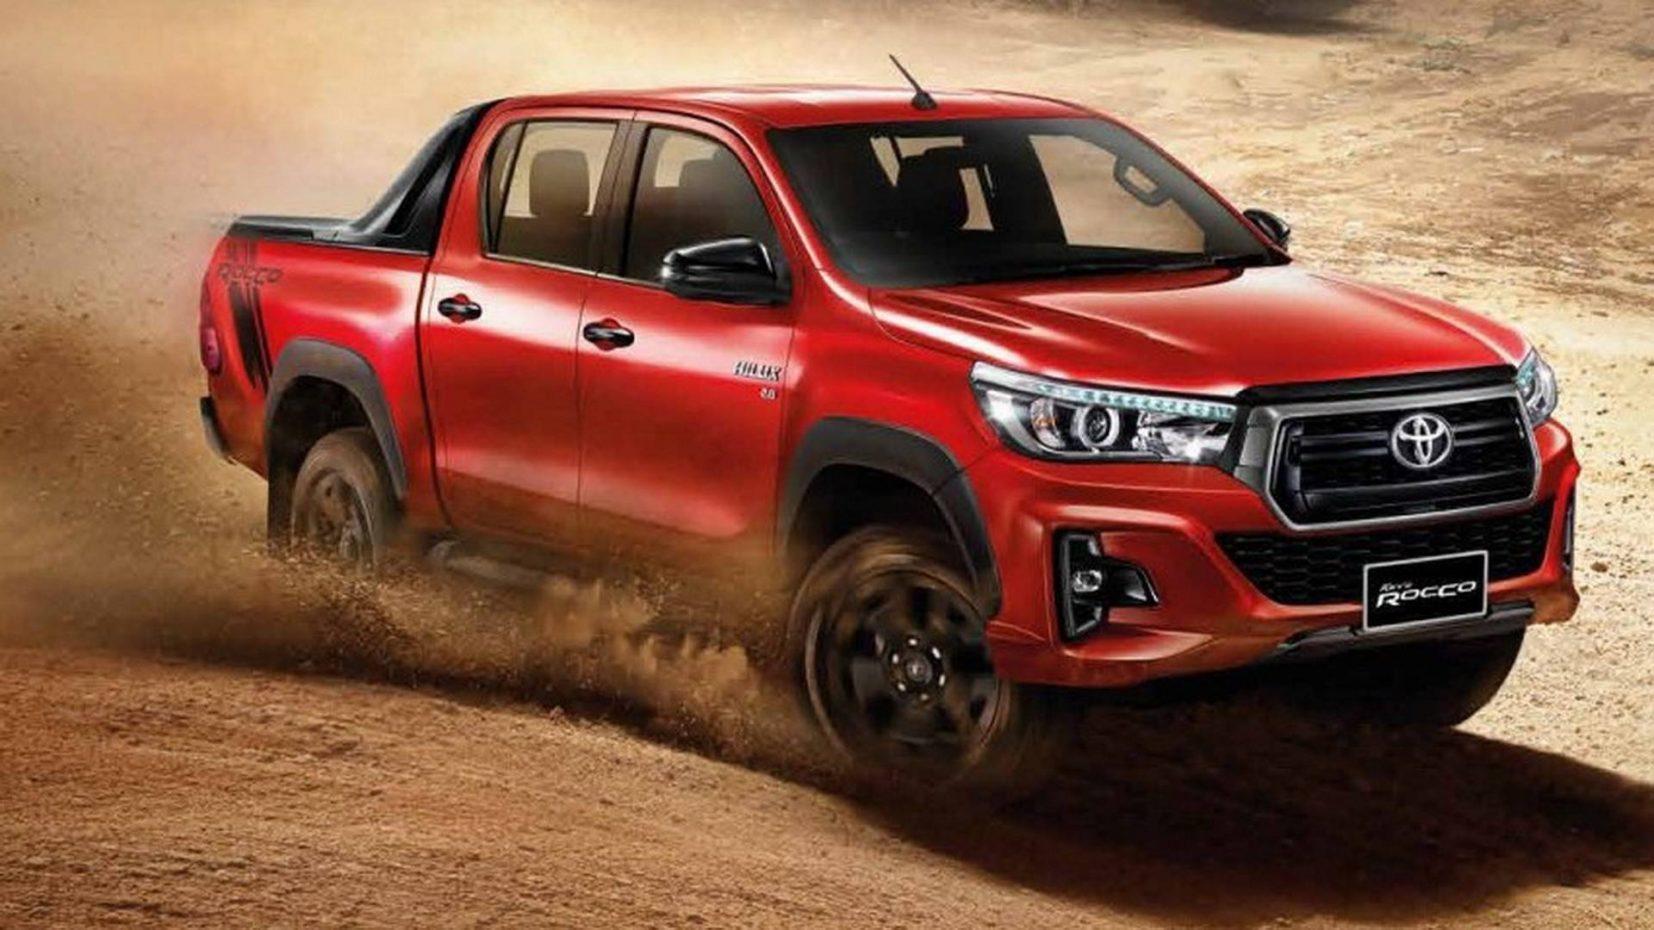 New 2019 Toyota Hilux Side HD Wallpaper Toyota Hilux Rogue